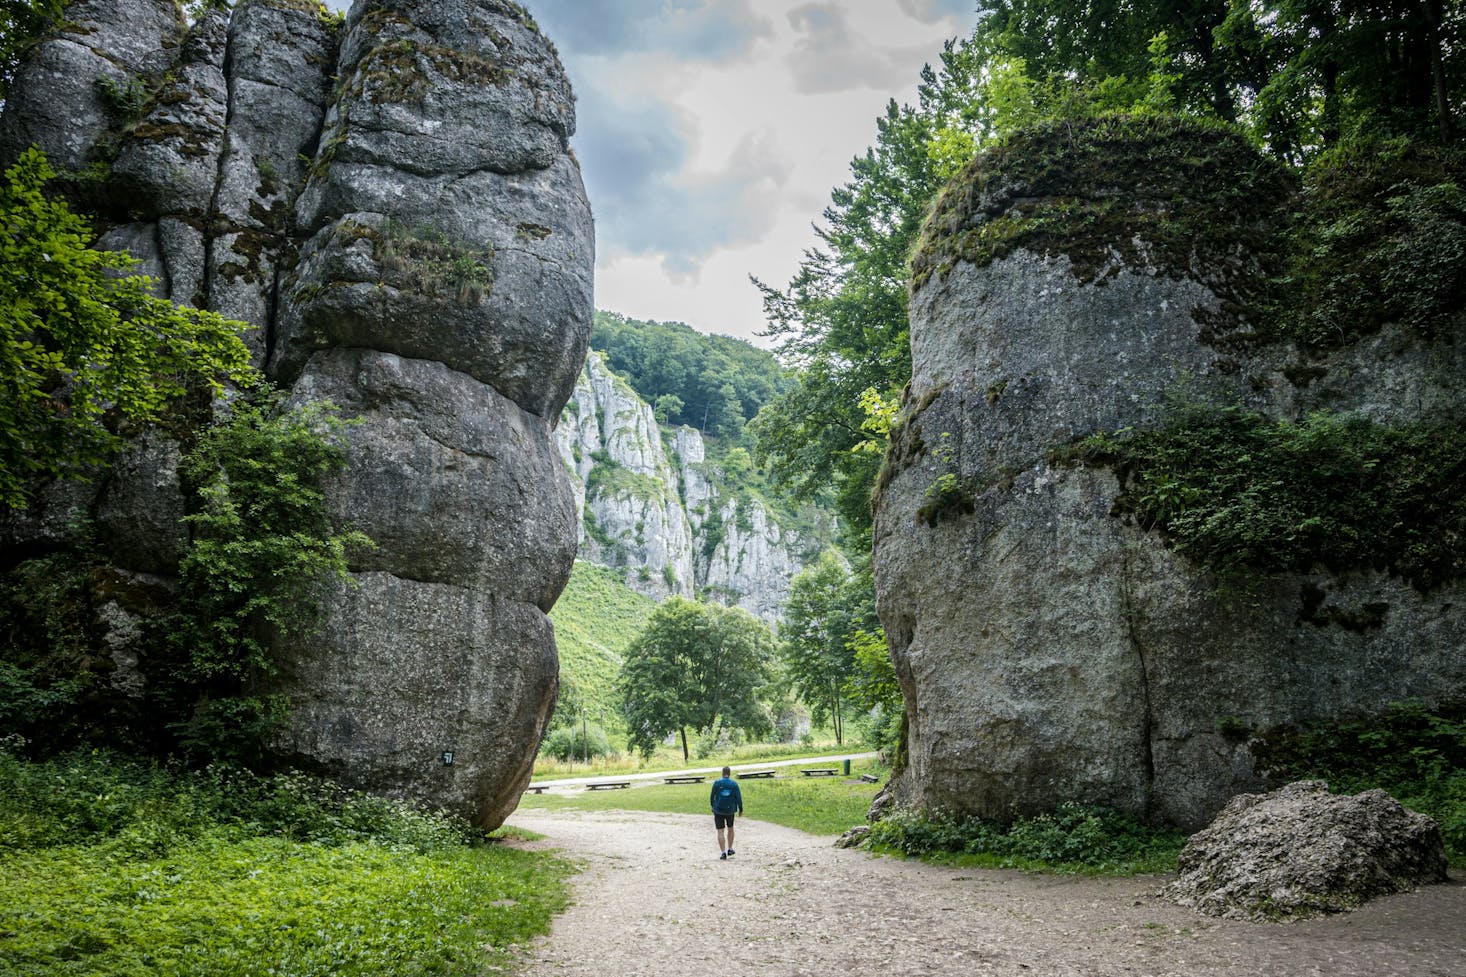 Person walking in between high rock walls in an expansive Krakow park